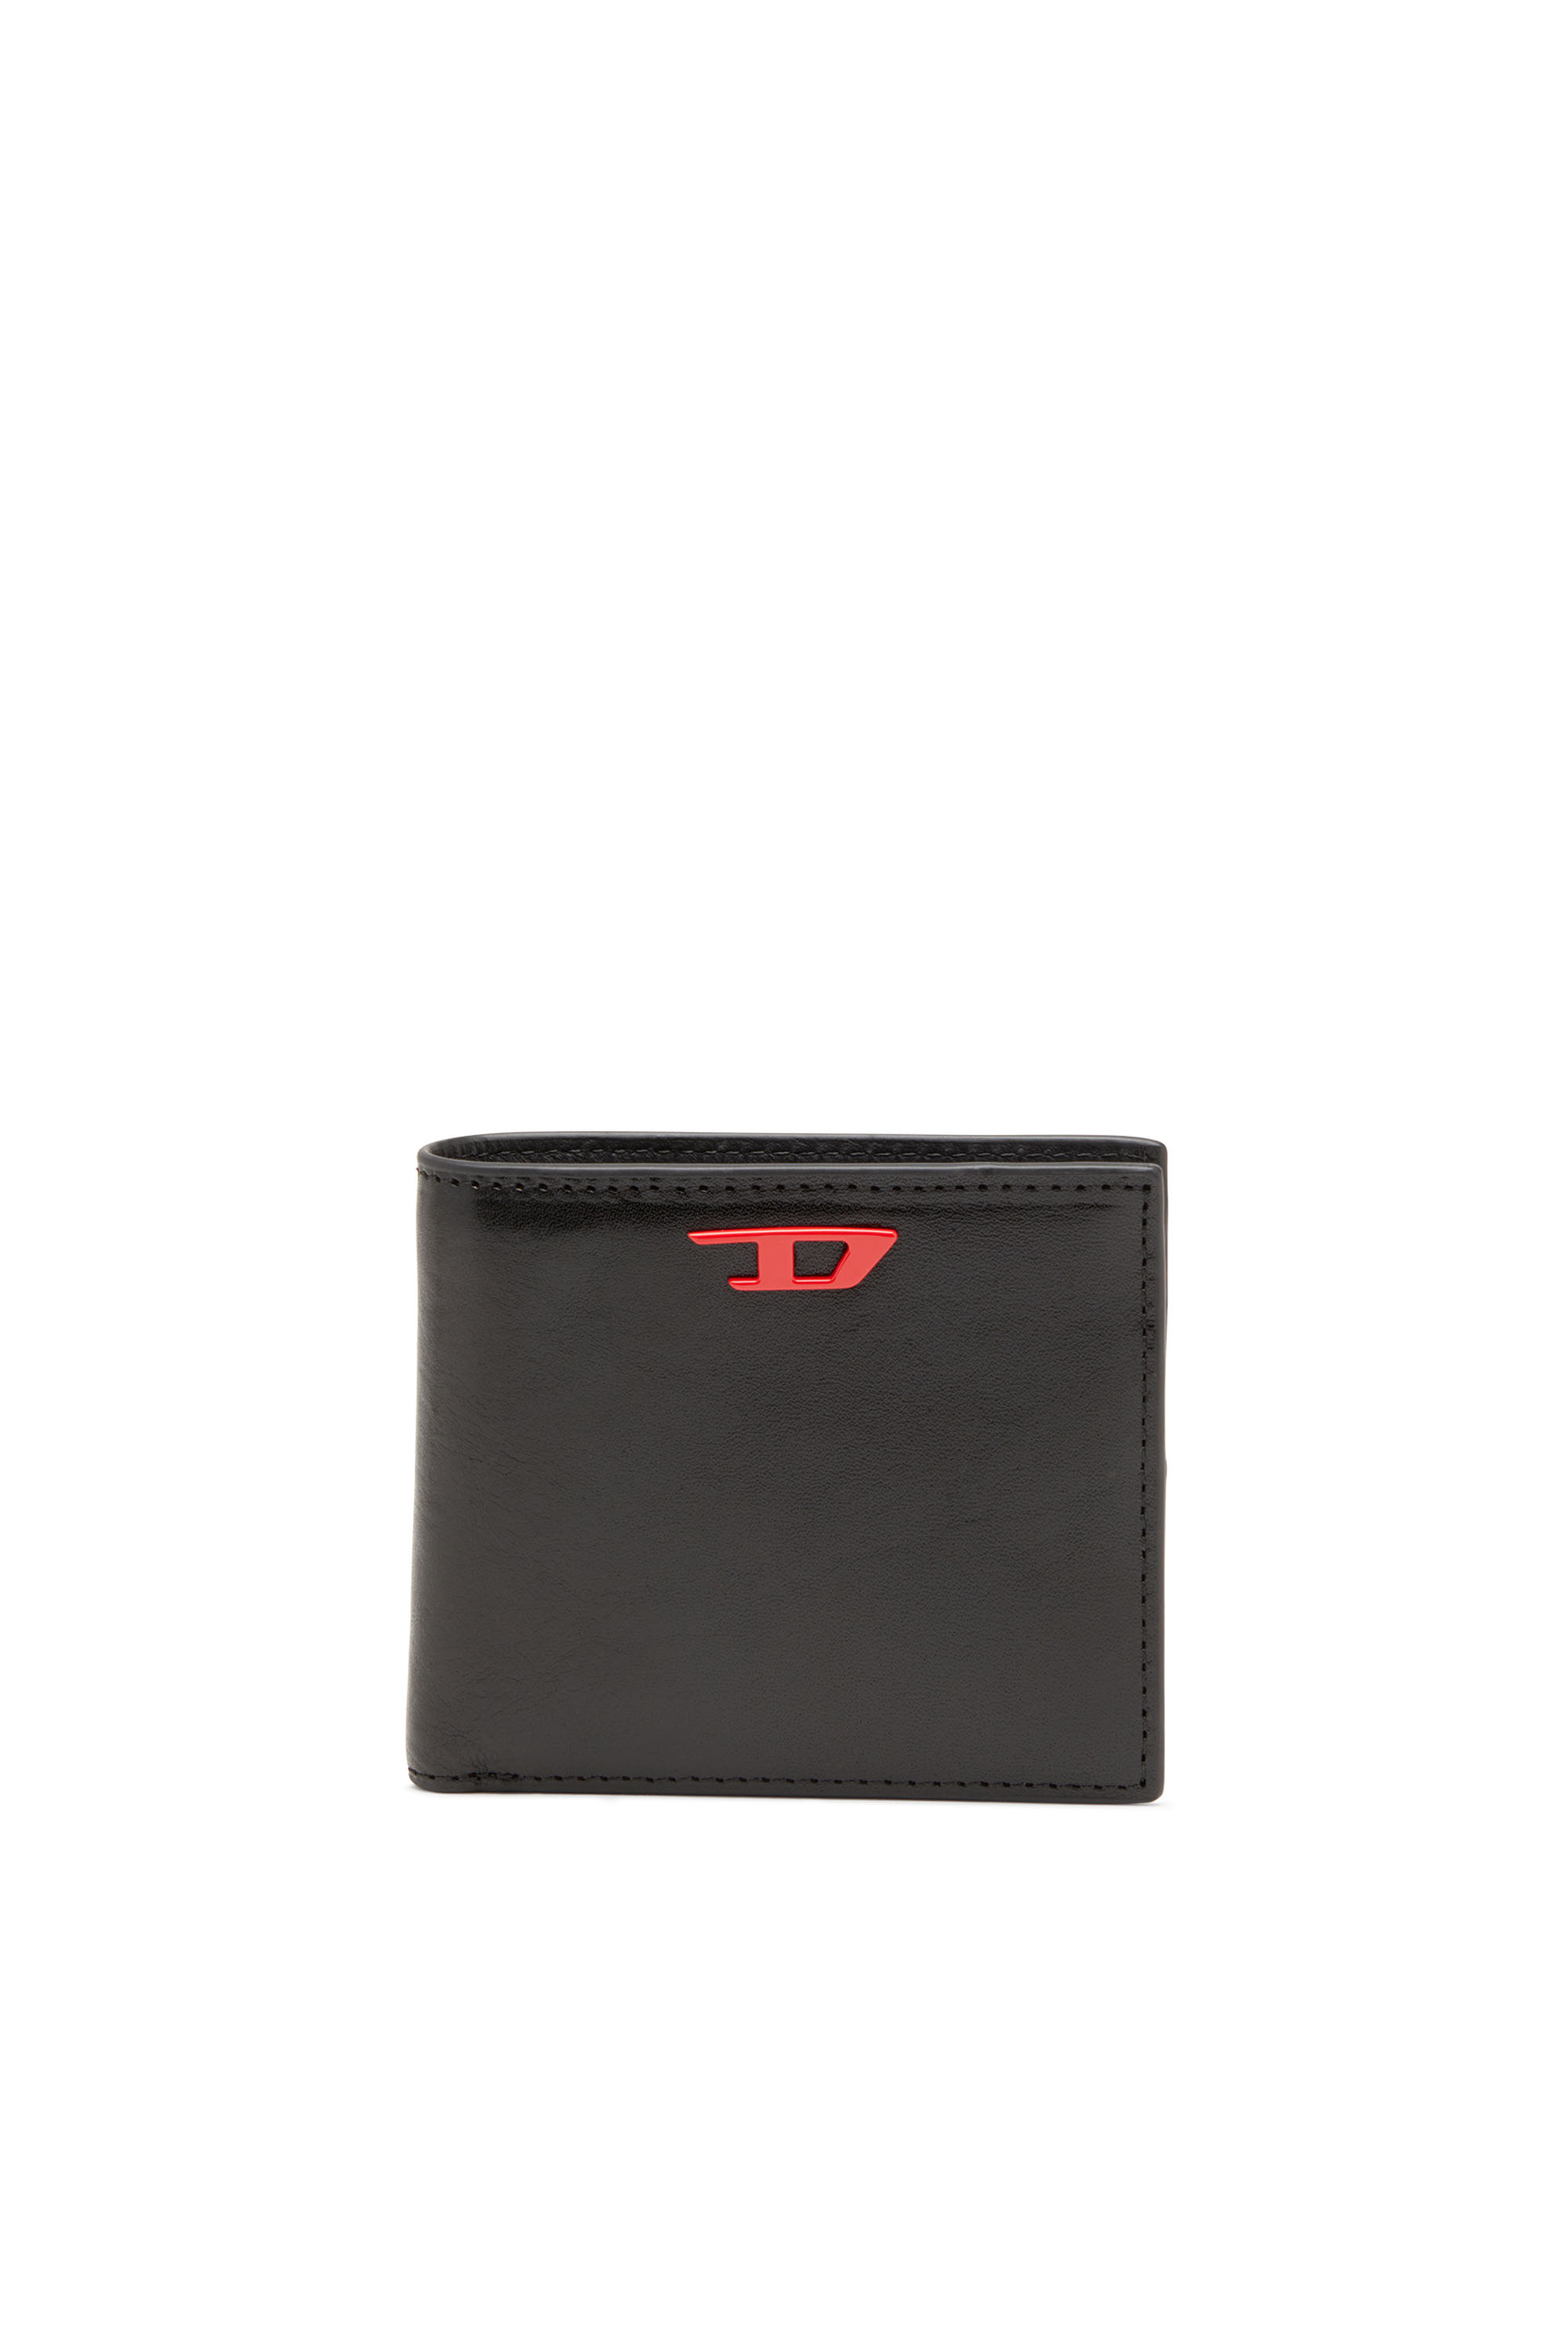 Leather bi-fold wallet with red D plaque